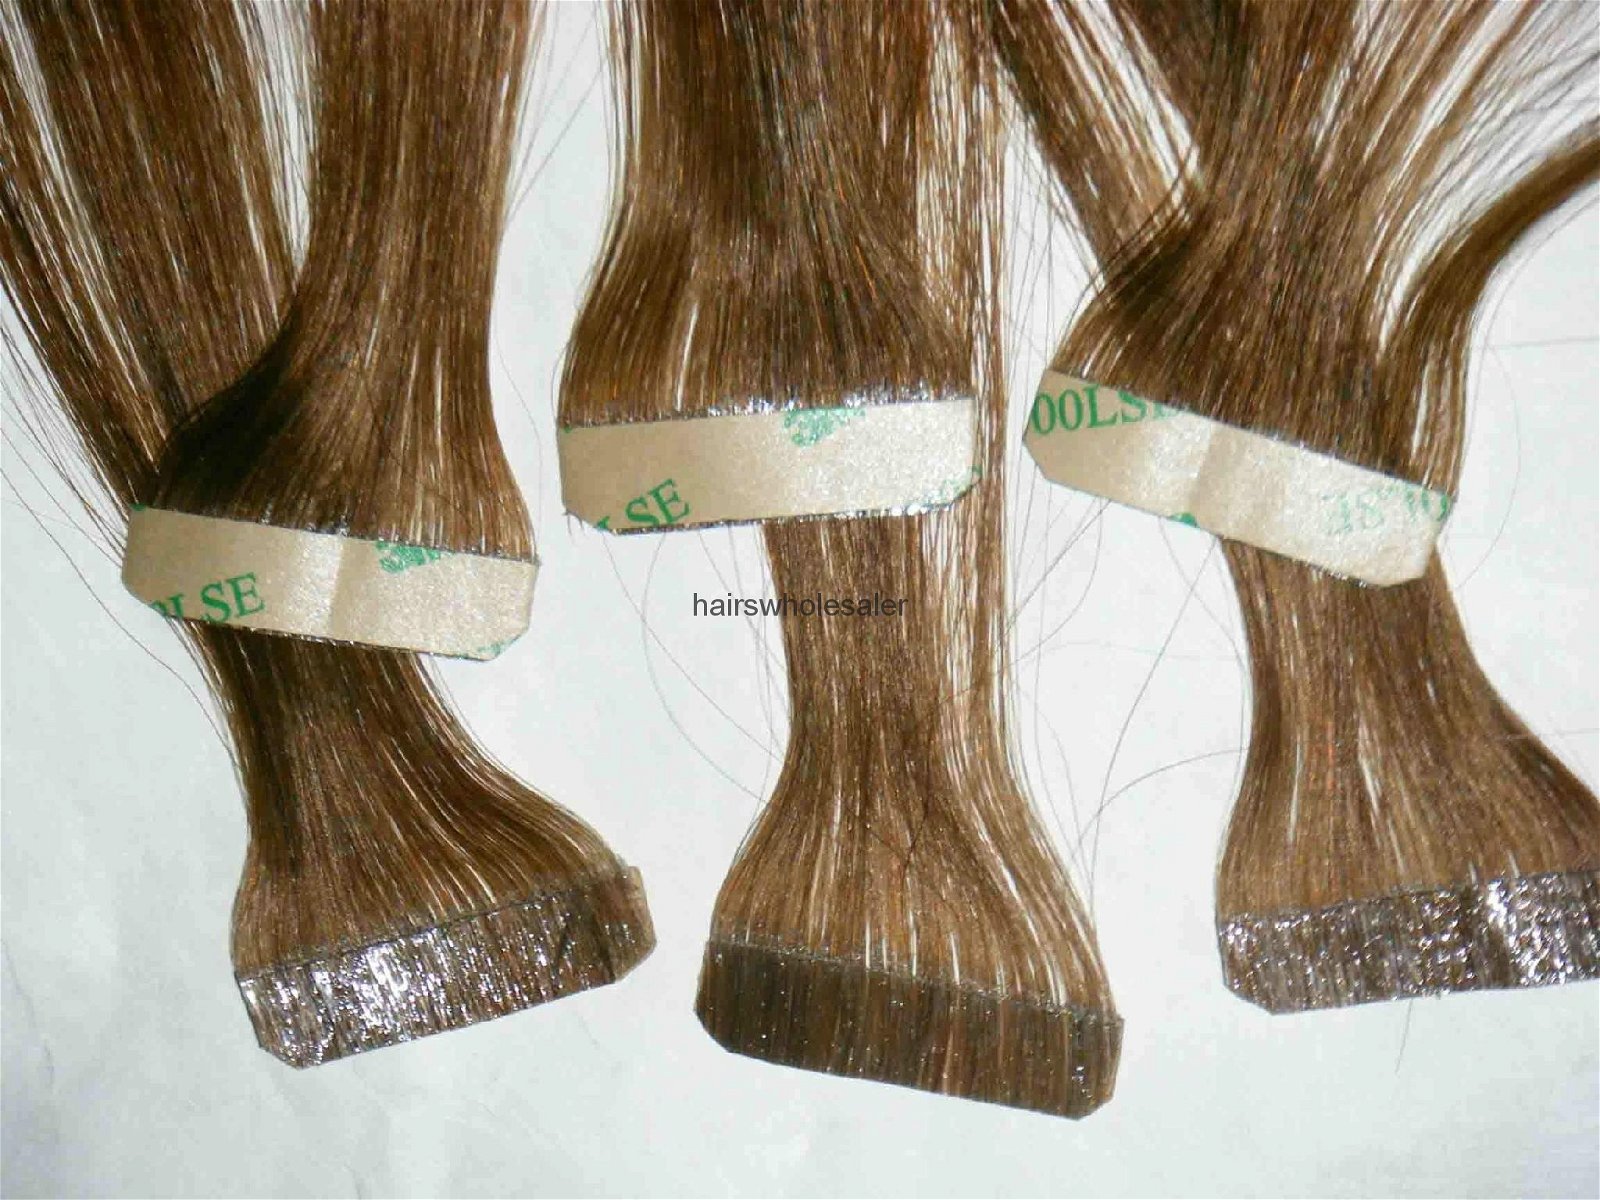  top quality 100%human hair 2.5g 18" 4# double sided tape hair extension 4